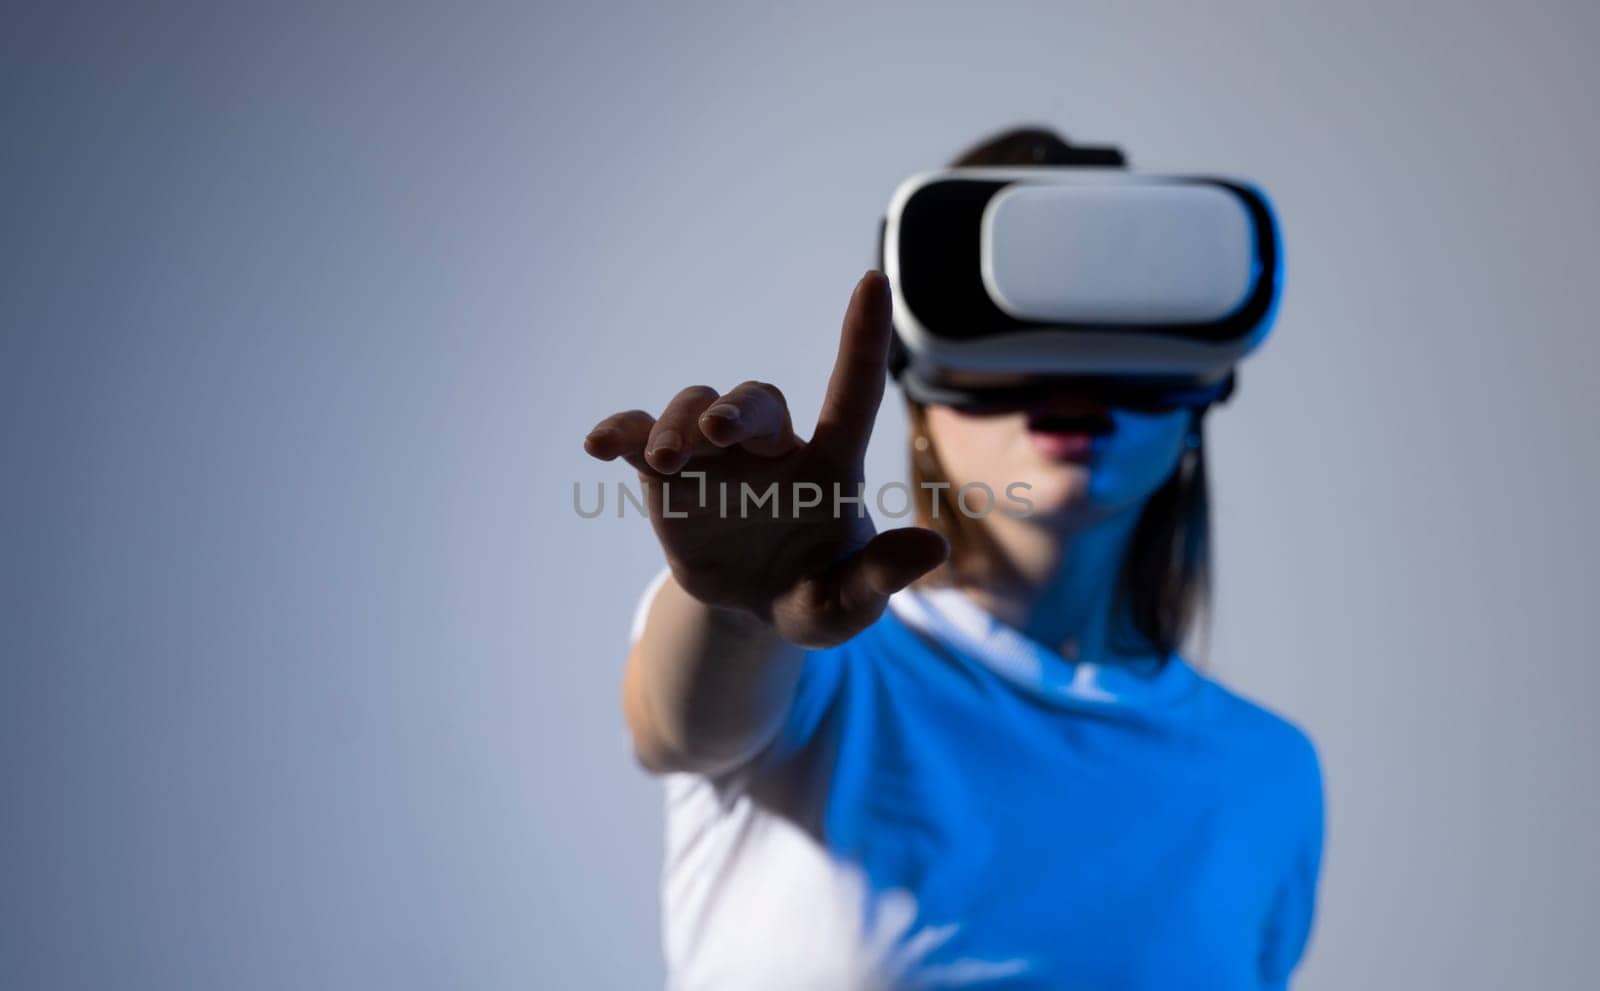 Female engineer wearing virtual reality headset designing a new pruducts or technologis using VR technology. Development and prototyping software. by vovsht